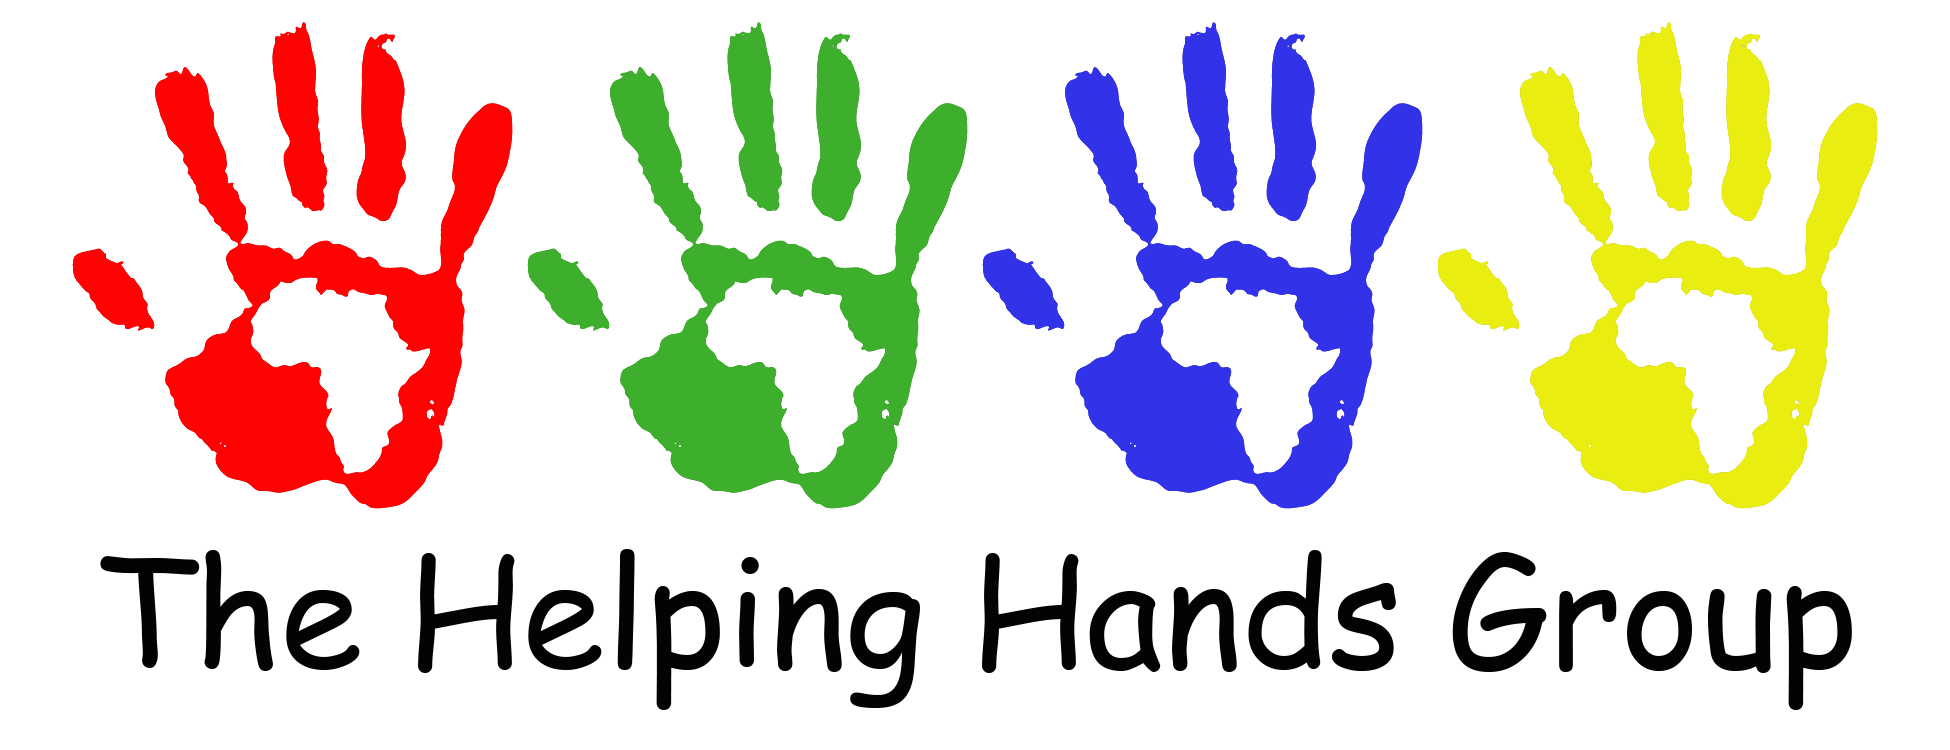 the colored bears hand in hand logo